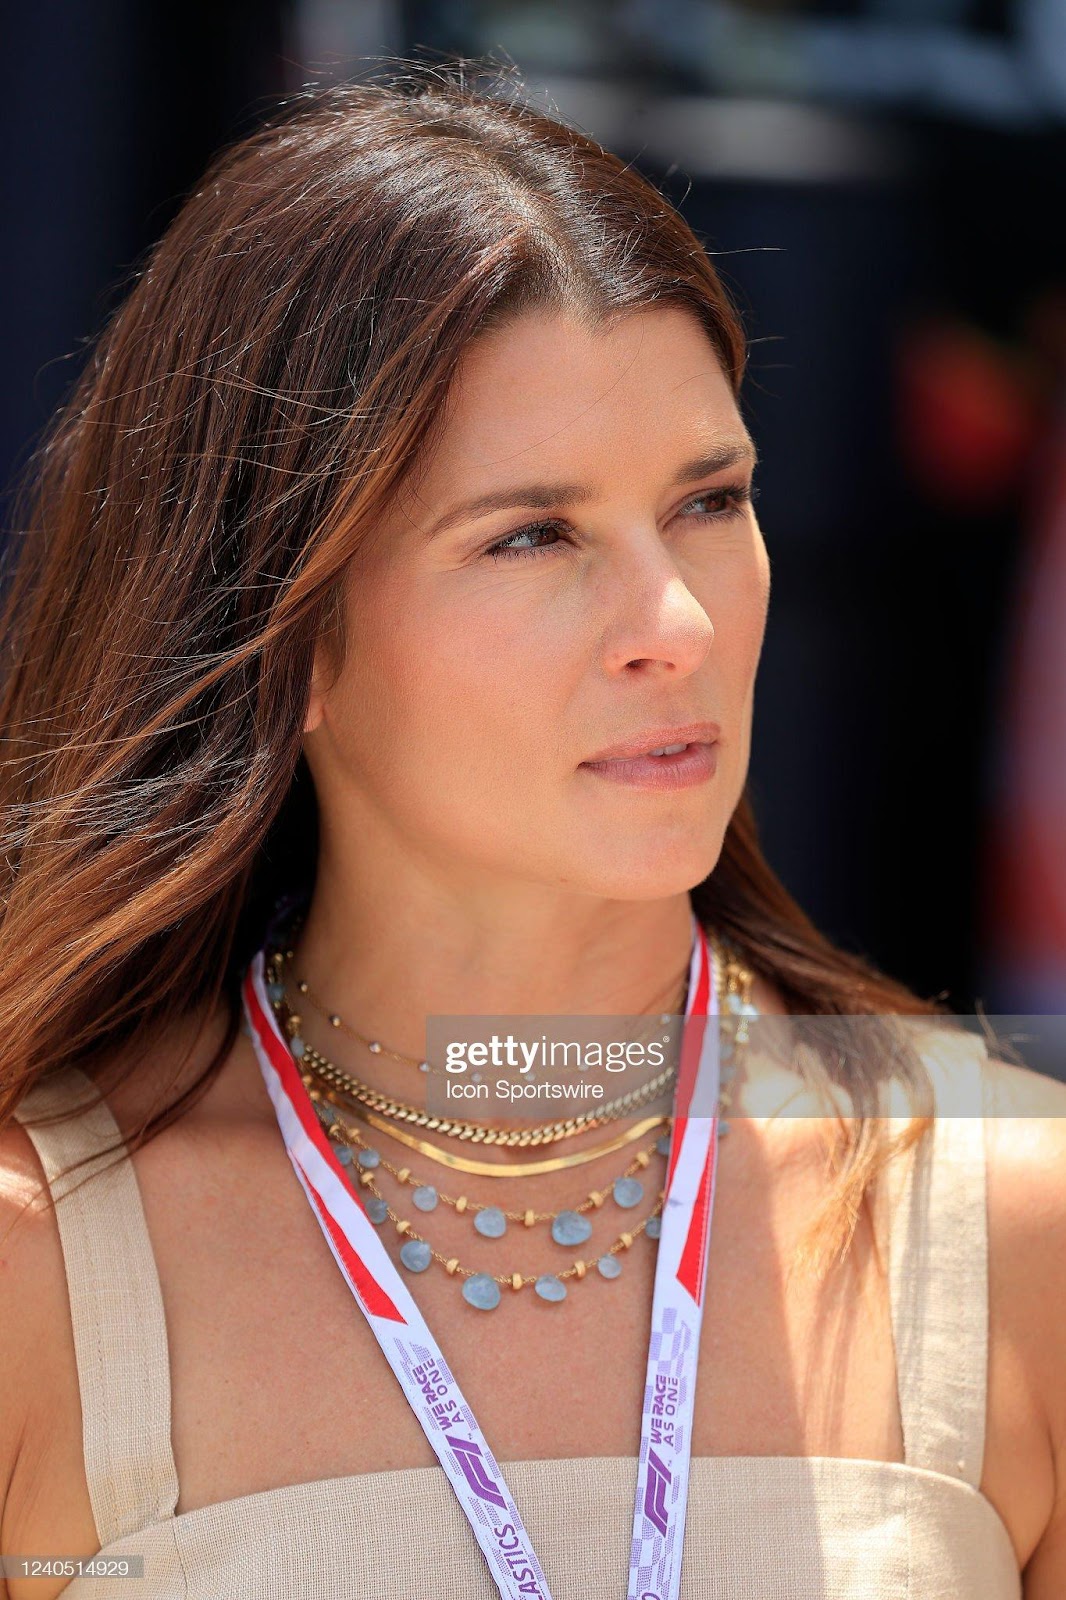 D:\Documenti\posts\posts\Miami\New folder\donne\former-indycar-and-nascar-driver-danica-patrick-in-the-paddock-prior-picture-id1240514929.jpg